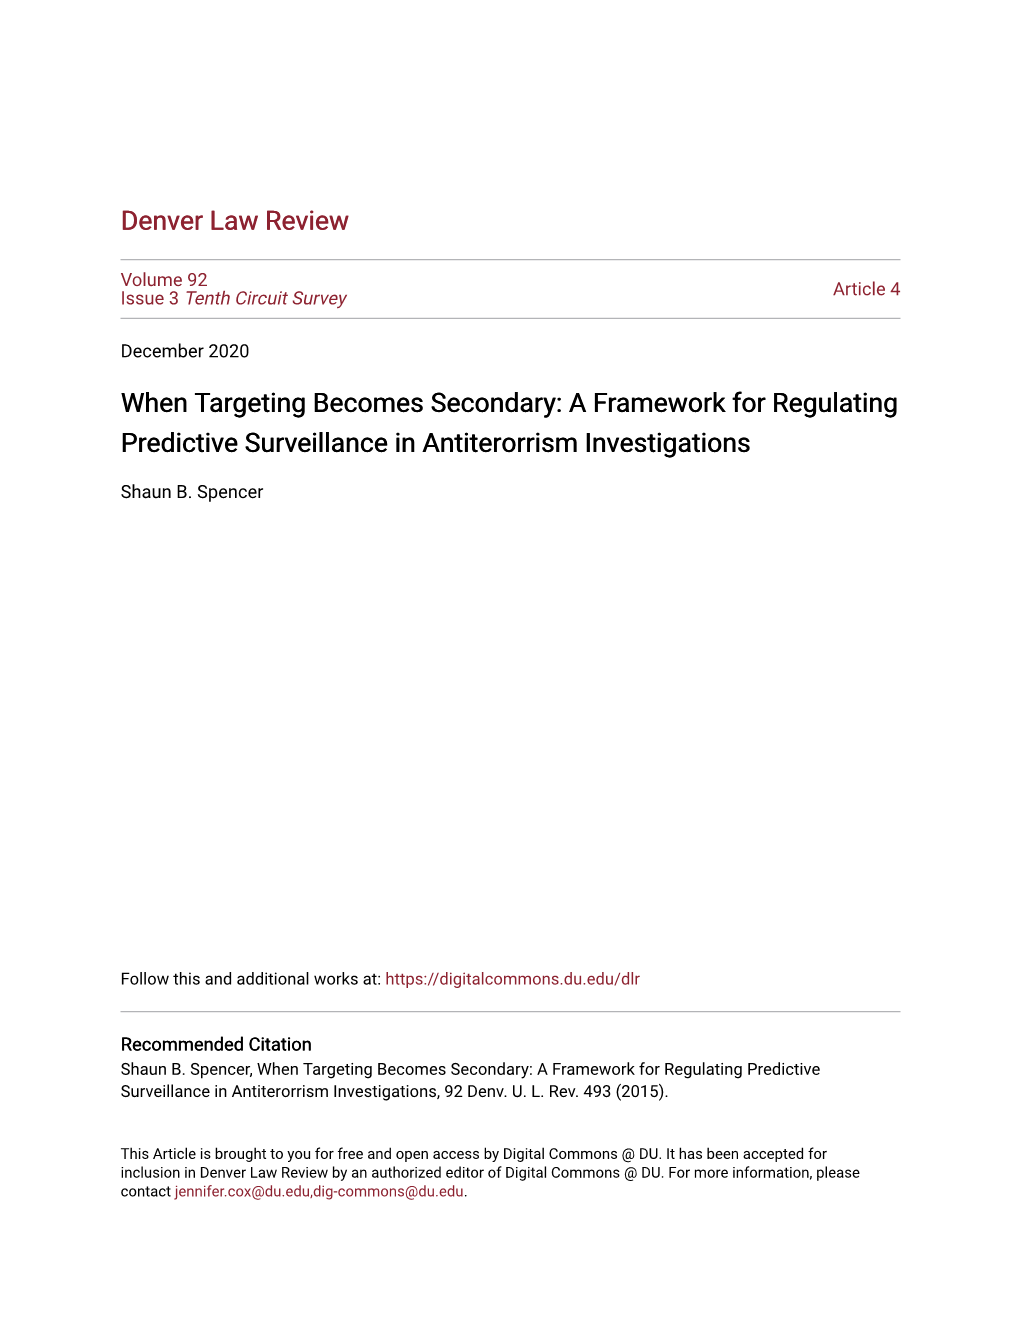 When Targeting Becomes Secondary: a Framework for Regulating Predictive Surveillance in Antiterorrism Investigations